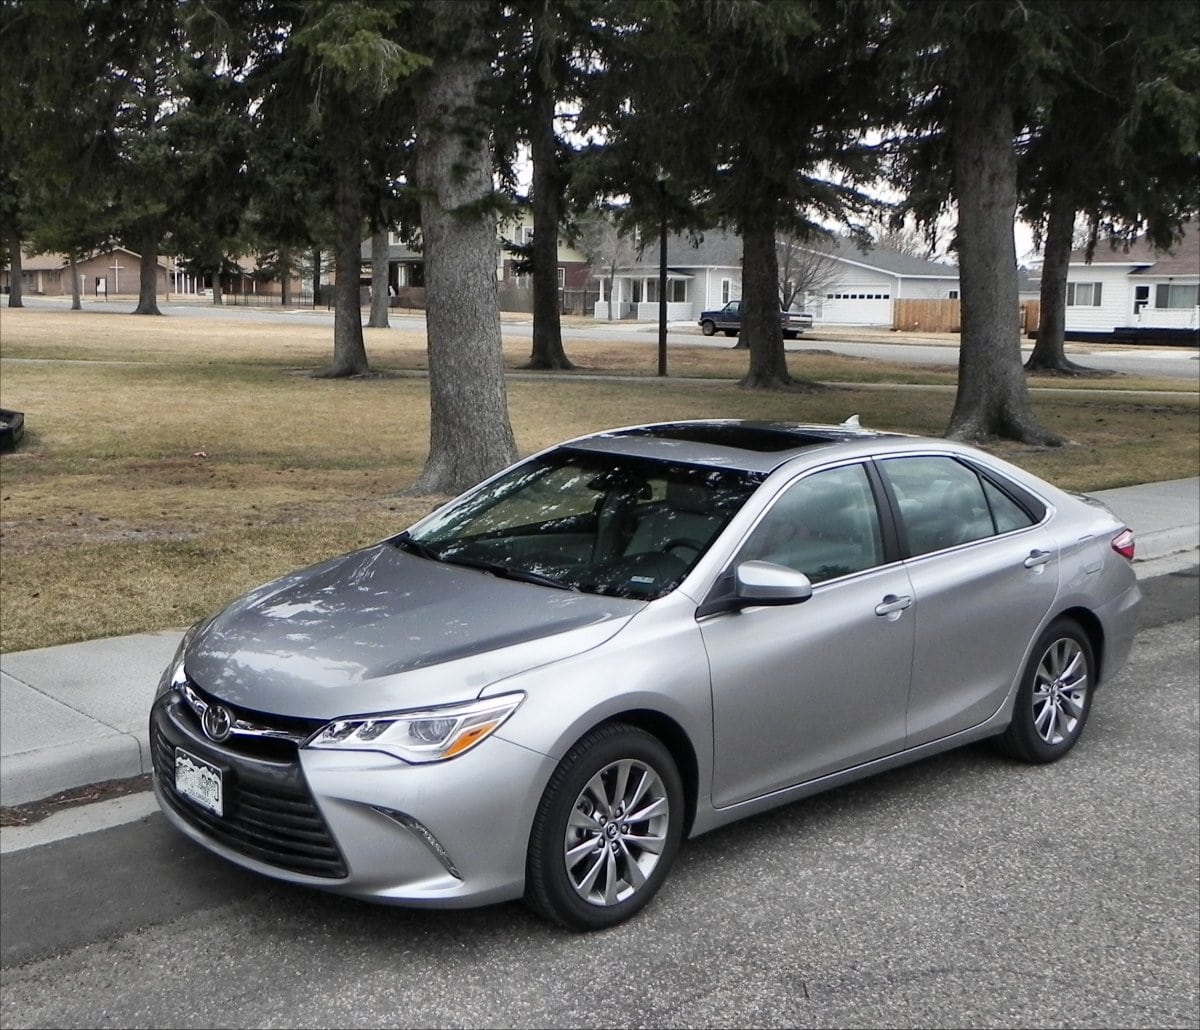 2016 Toyota Camry Hybrid – why change a good thing?